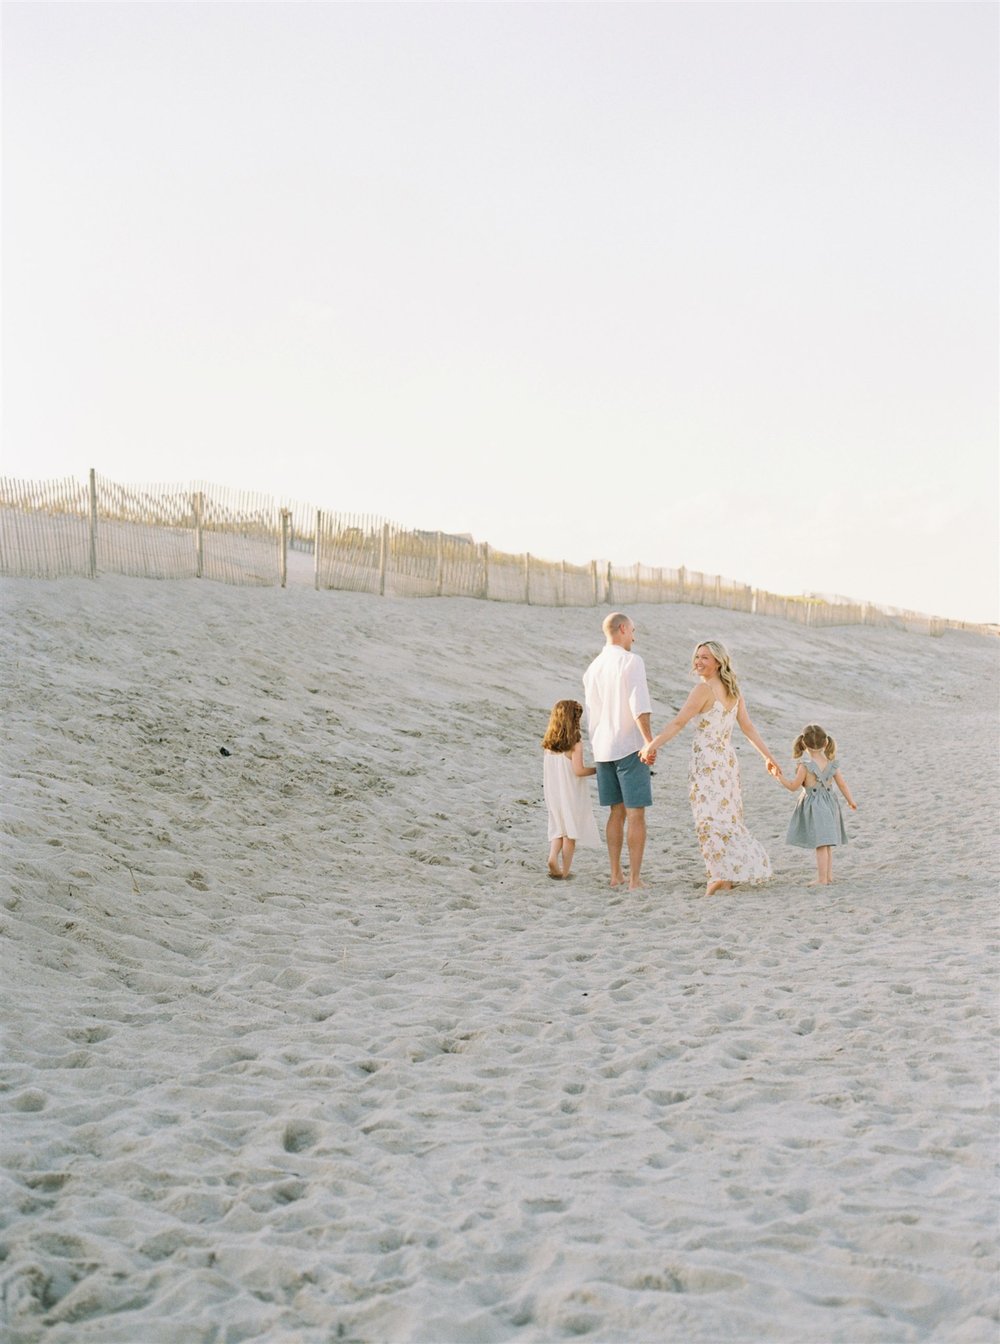 Family walking away from camera holding hands during photo session  | NKB Photo